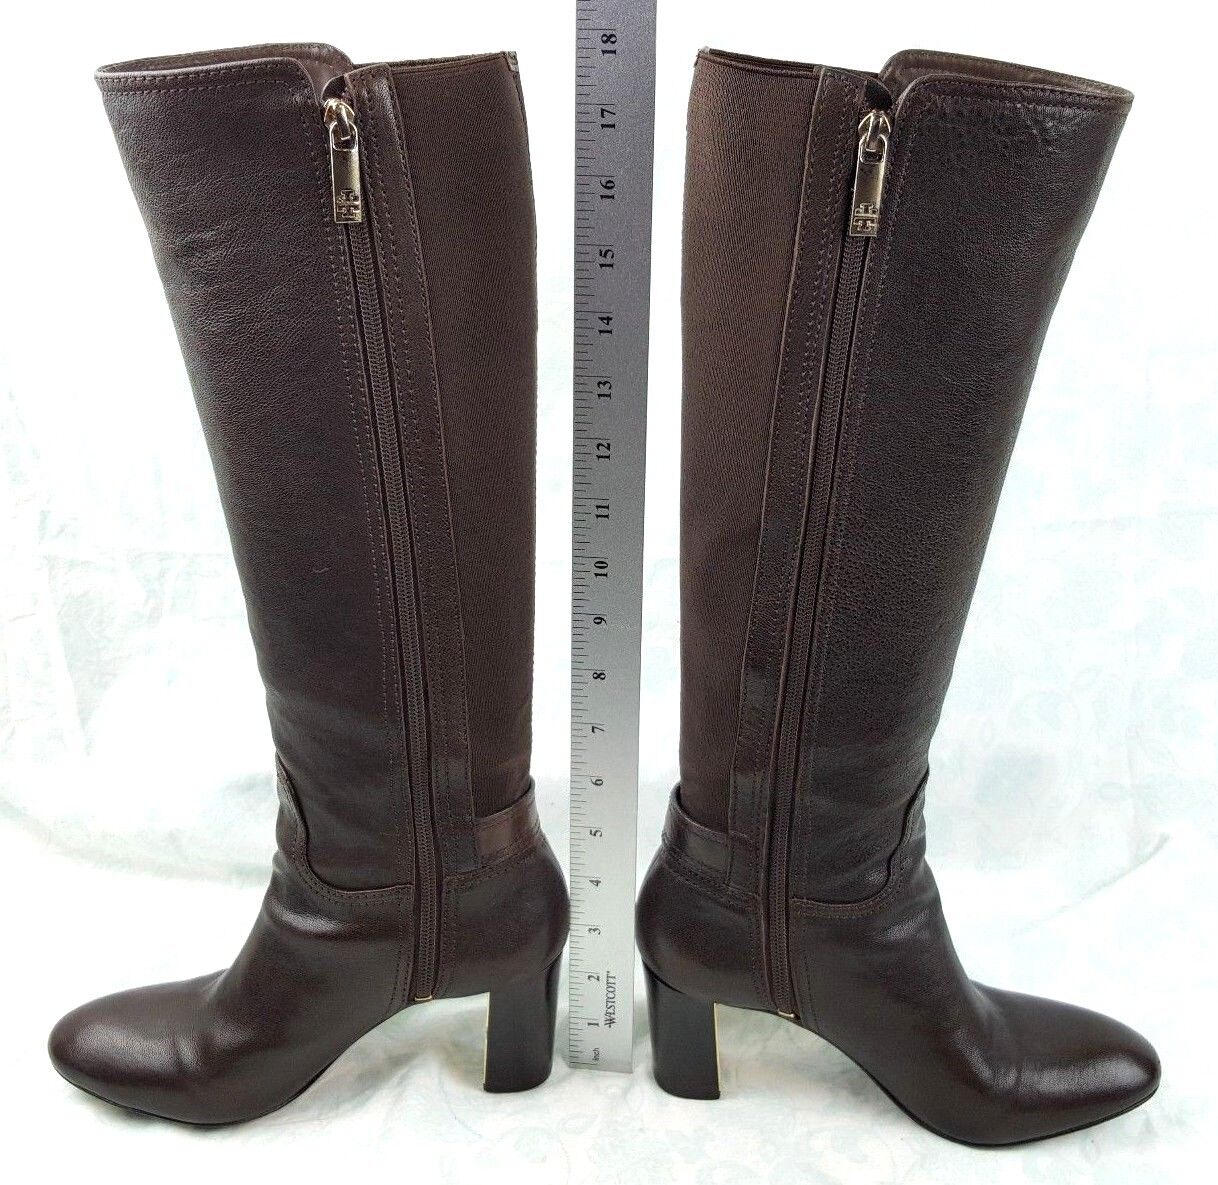 Tory Burch Brown Leather Gold Buckle High Heel Knee High Boots - Luxury Cheaper